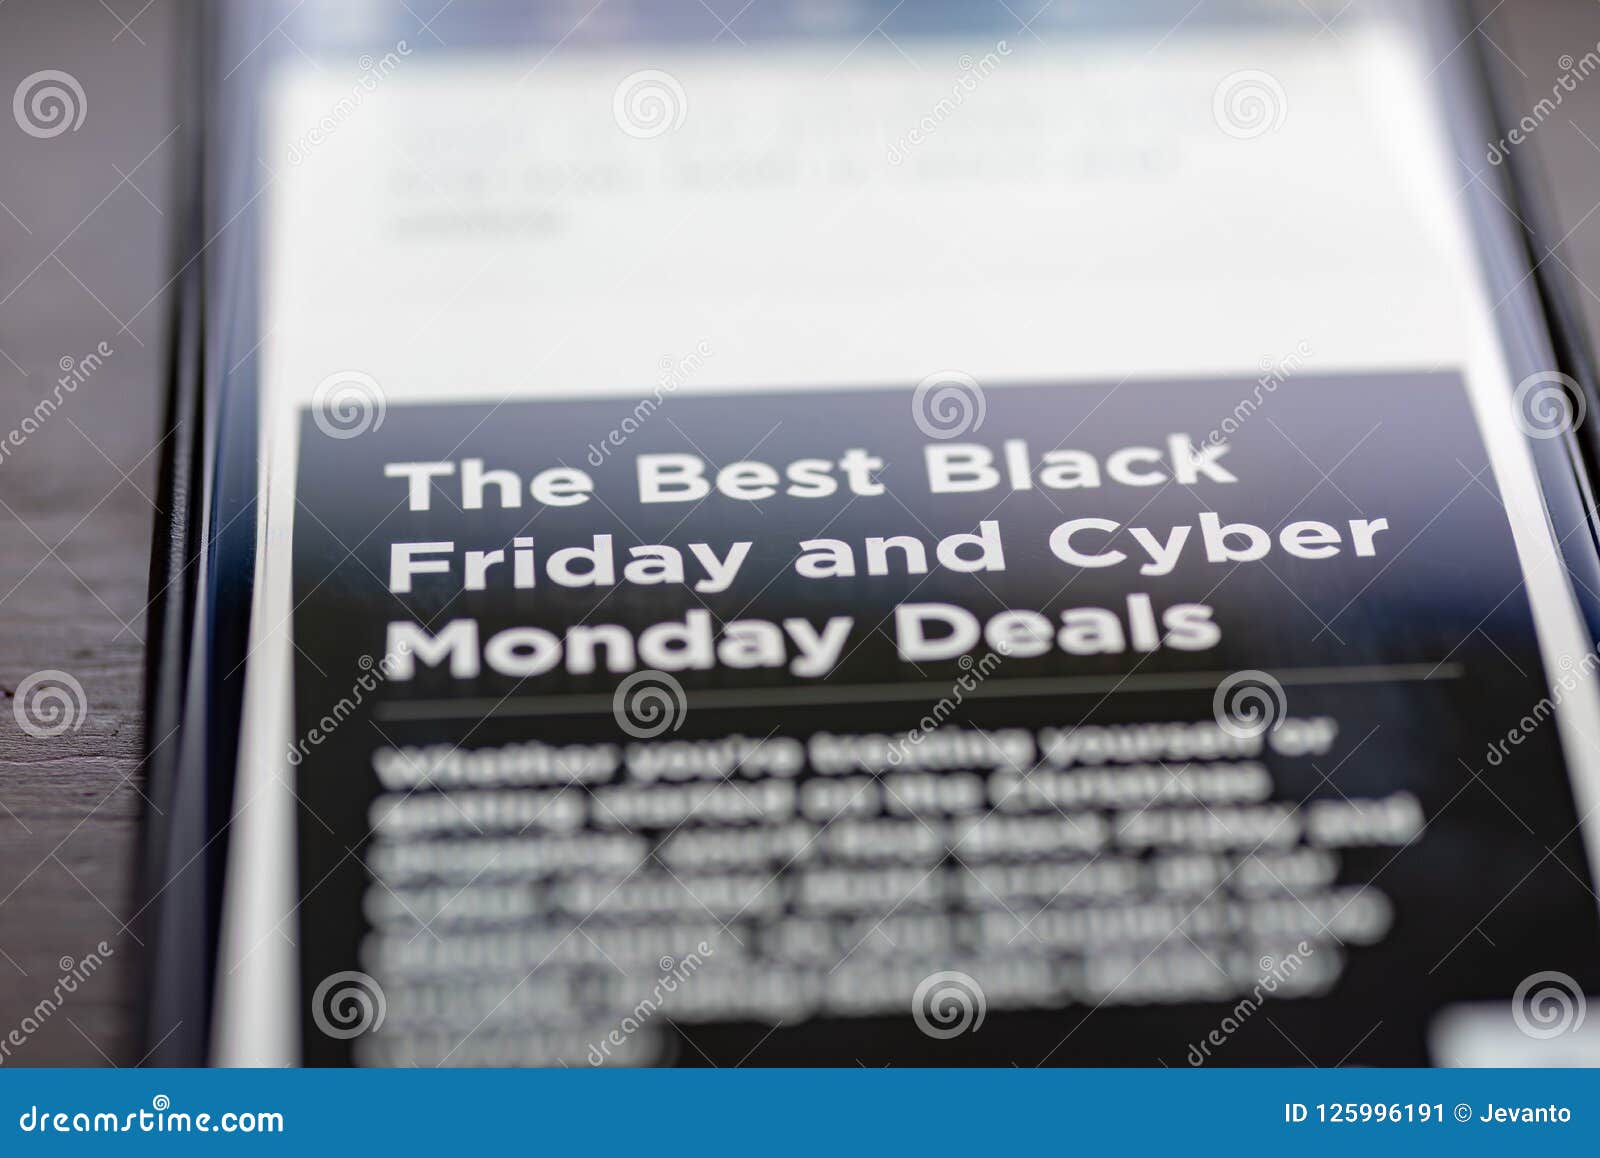 Black Friday And Cyber Monday Deals Text On Shopping App On Smartphone Screen Closeup Stock Image Image Of Online Application 125996191